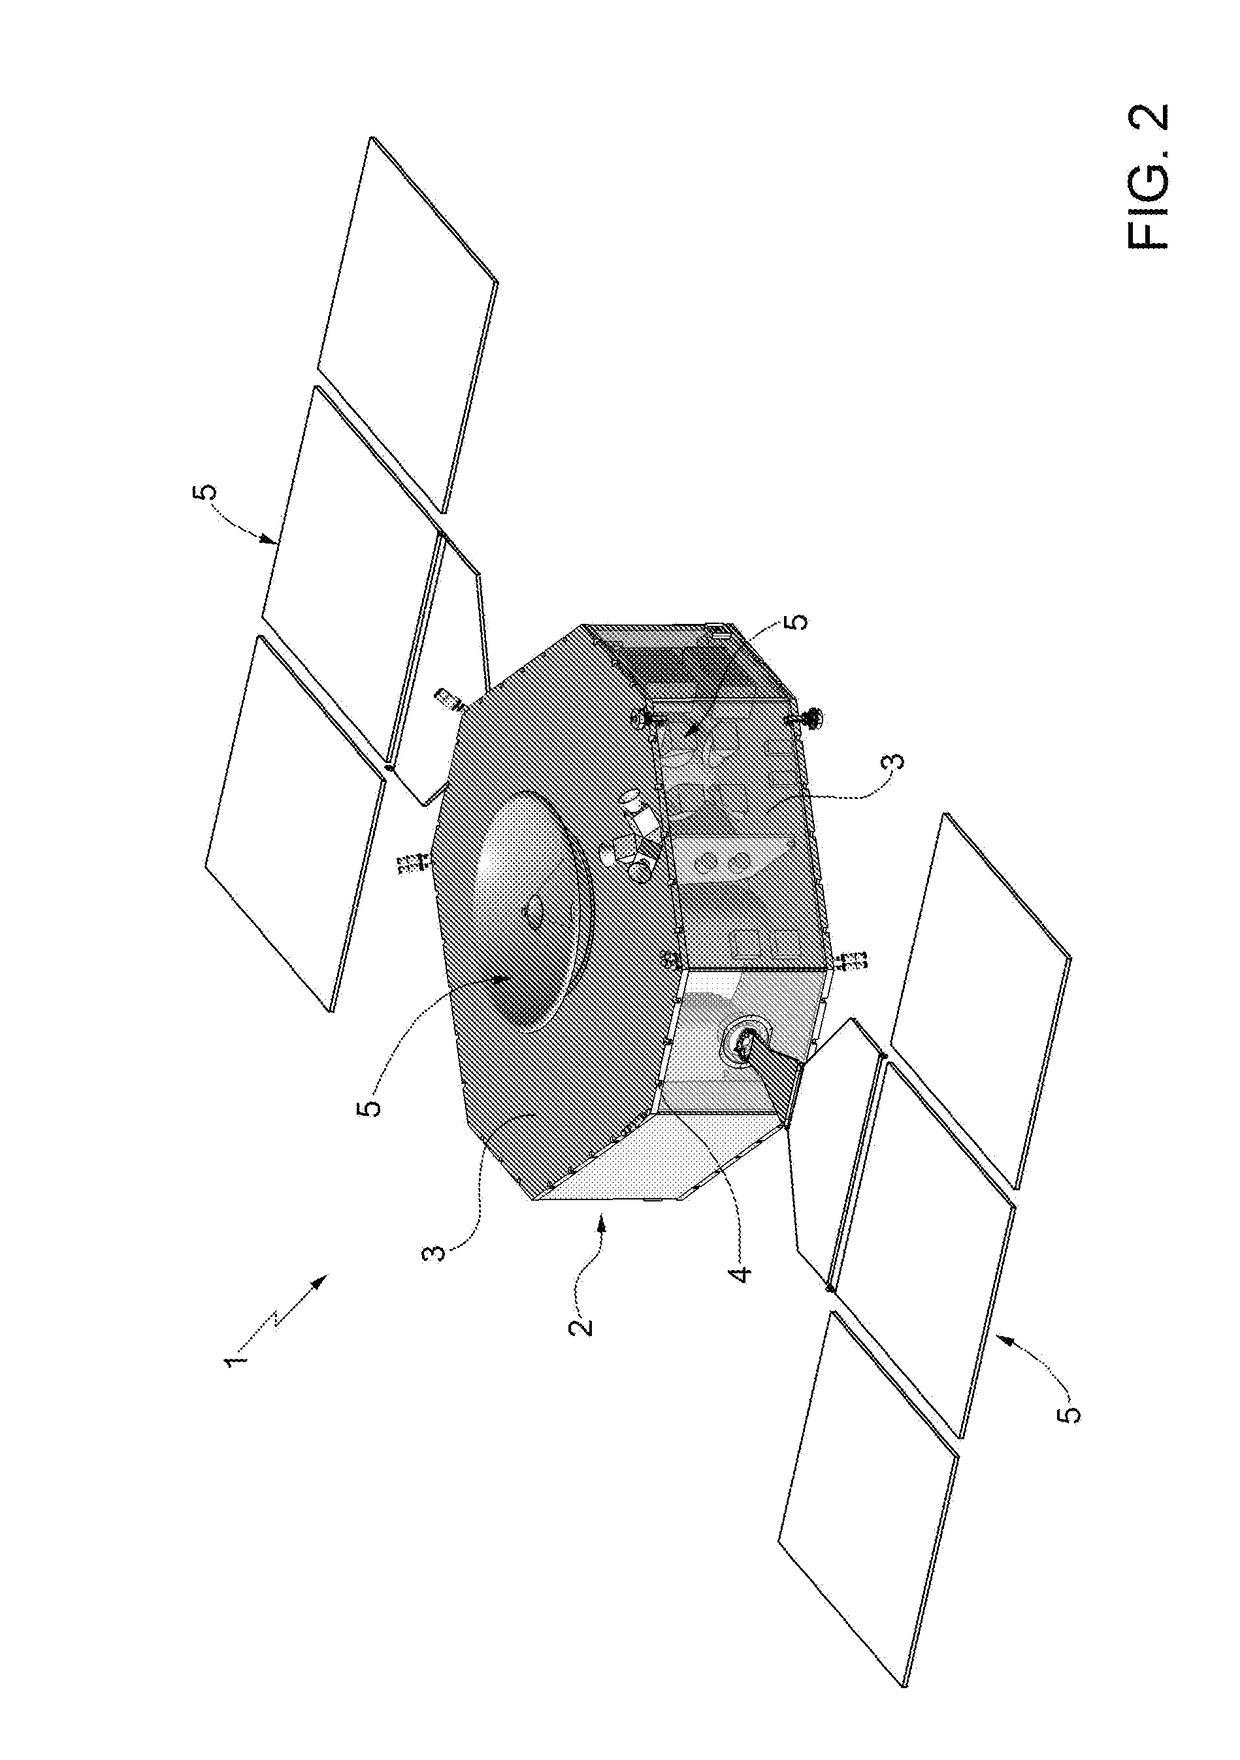 Passive Device Designed to Facilitate Demise of A Space System During Re-Entry Into the Earth's Atmosphere